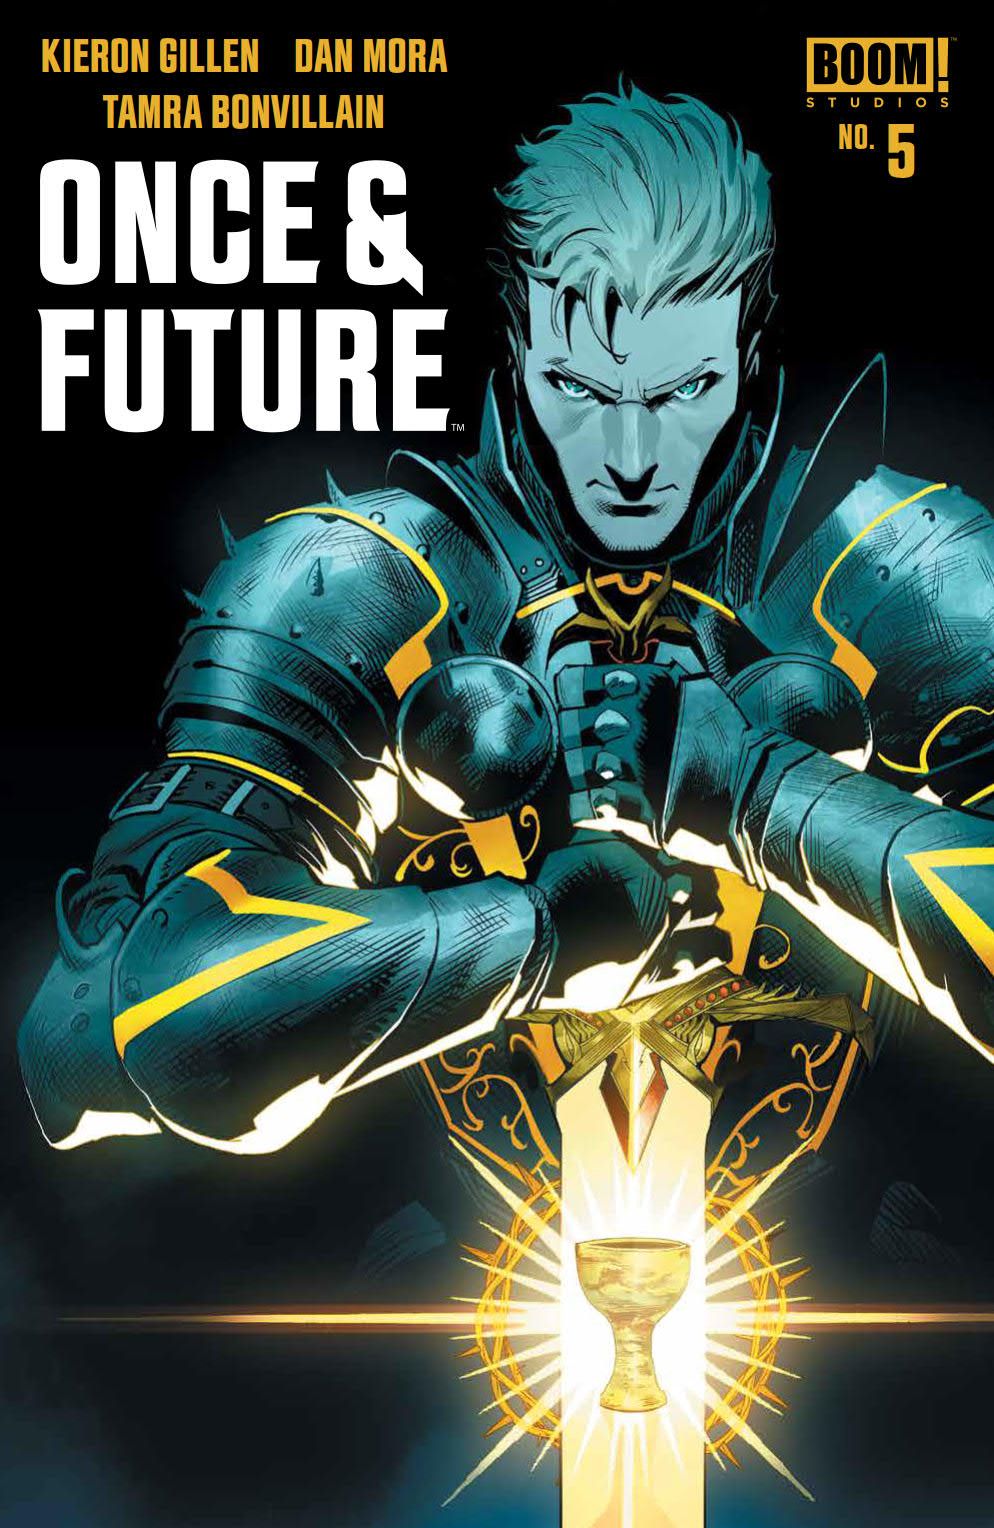 Once & Future #5 (@boomstudios) - Preview